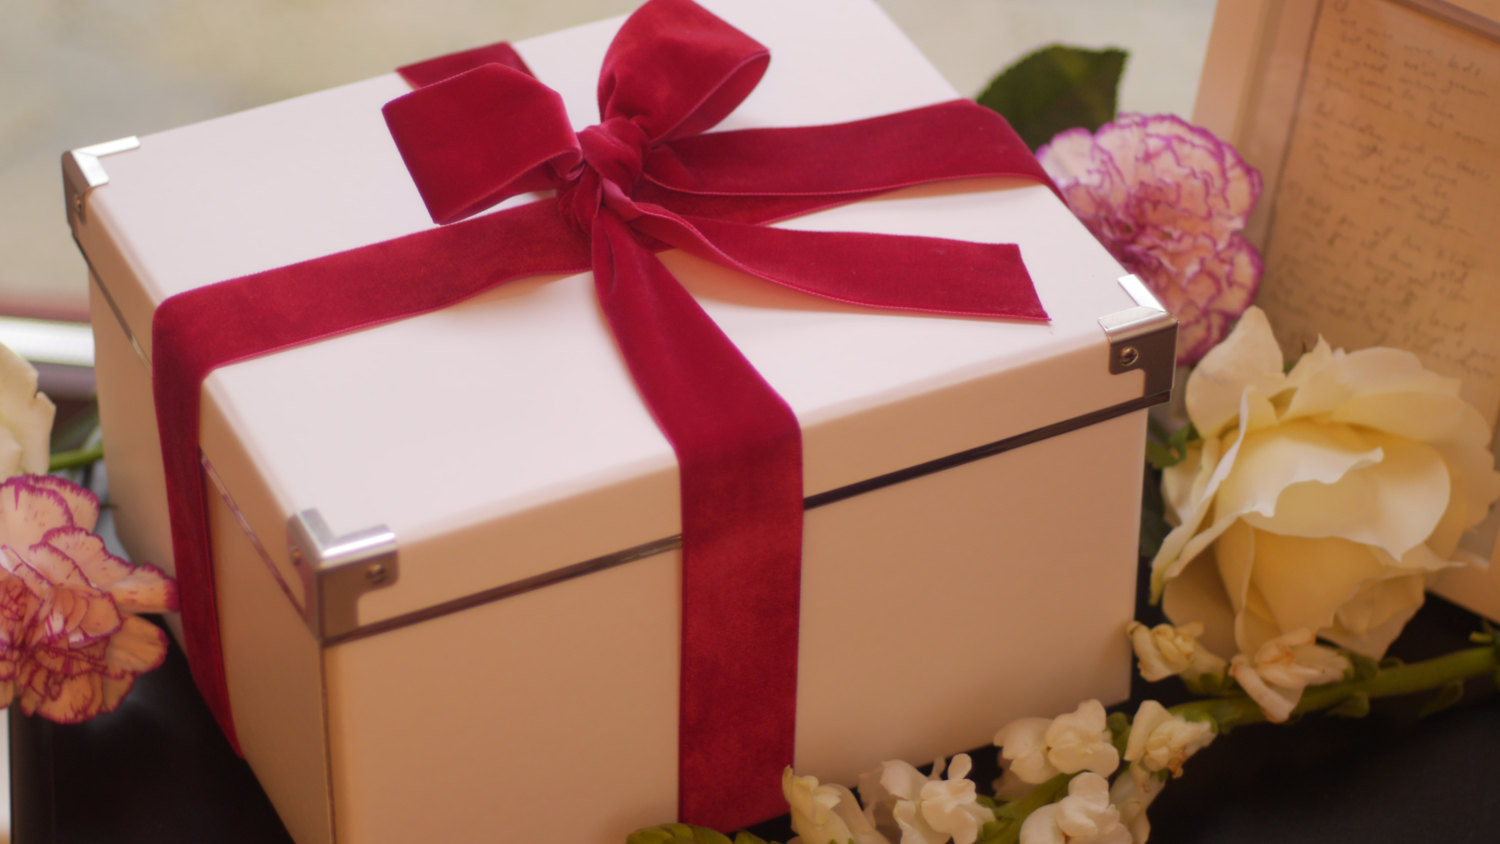 Valentine Gift Boxes Ideas
 18 Cute Little Gift Box Ideas for Valentine s Day